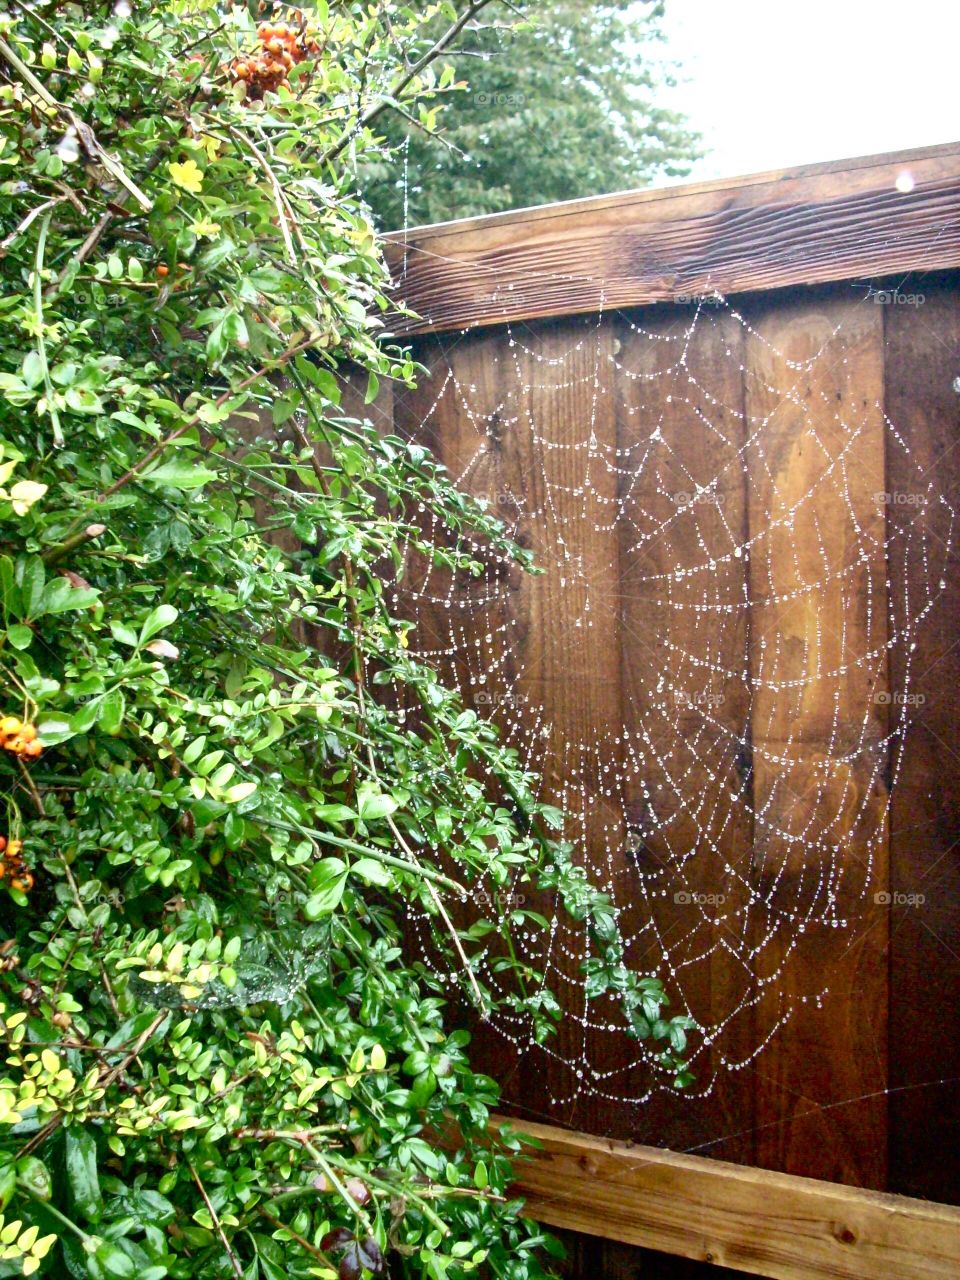 Large spider web in garden against fence and bushes showing detail after the rain. 